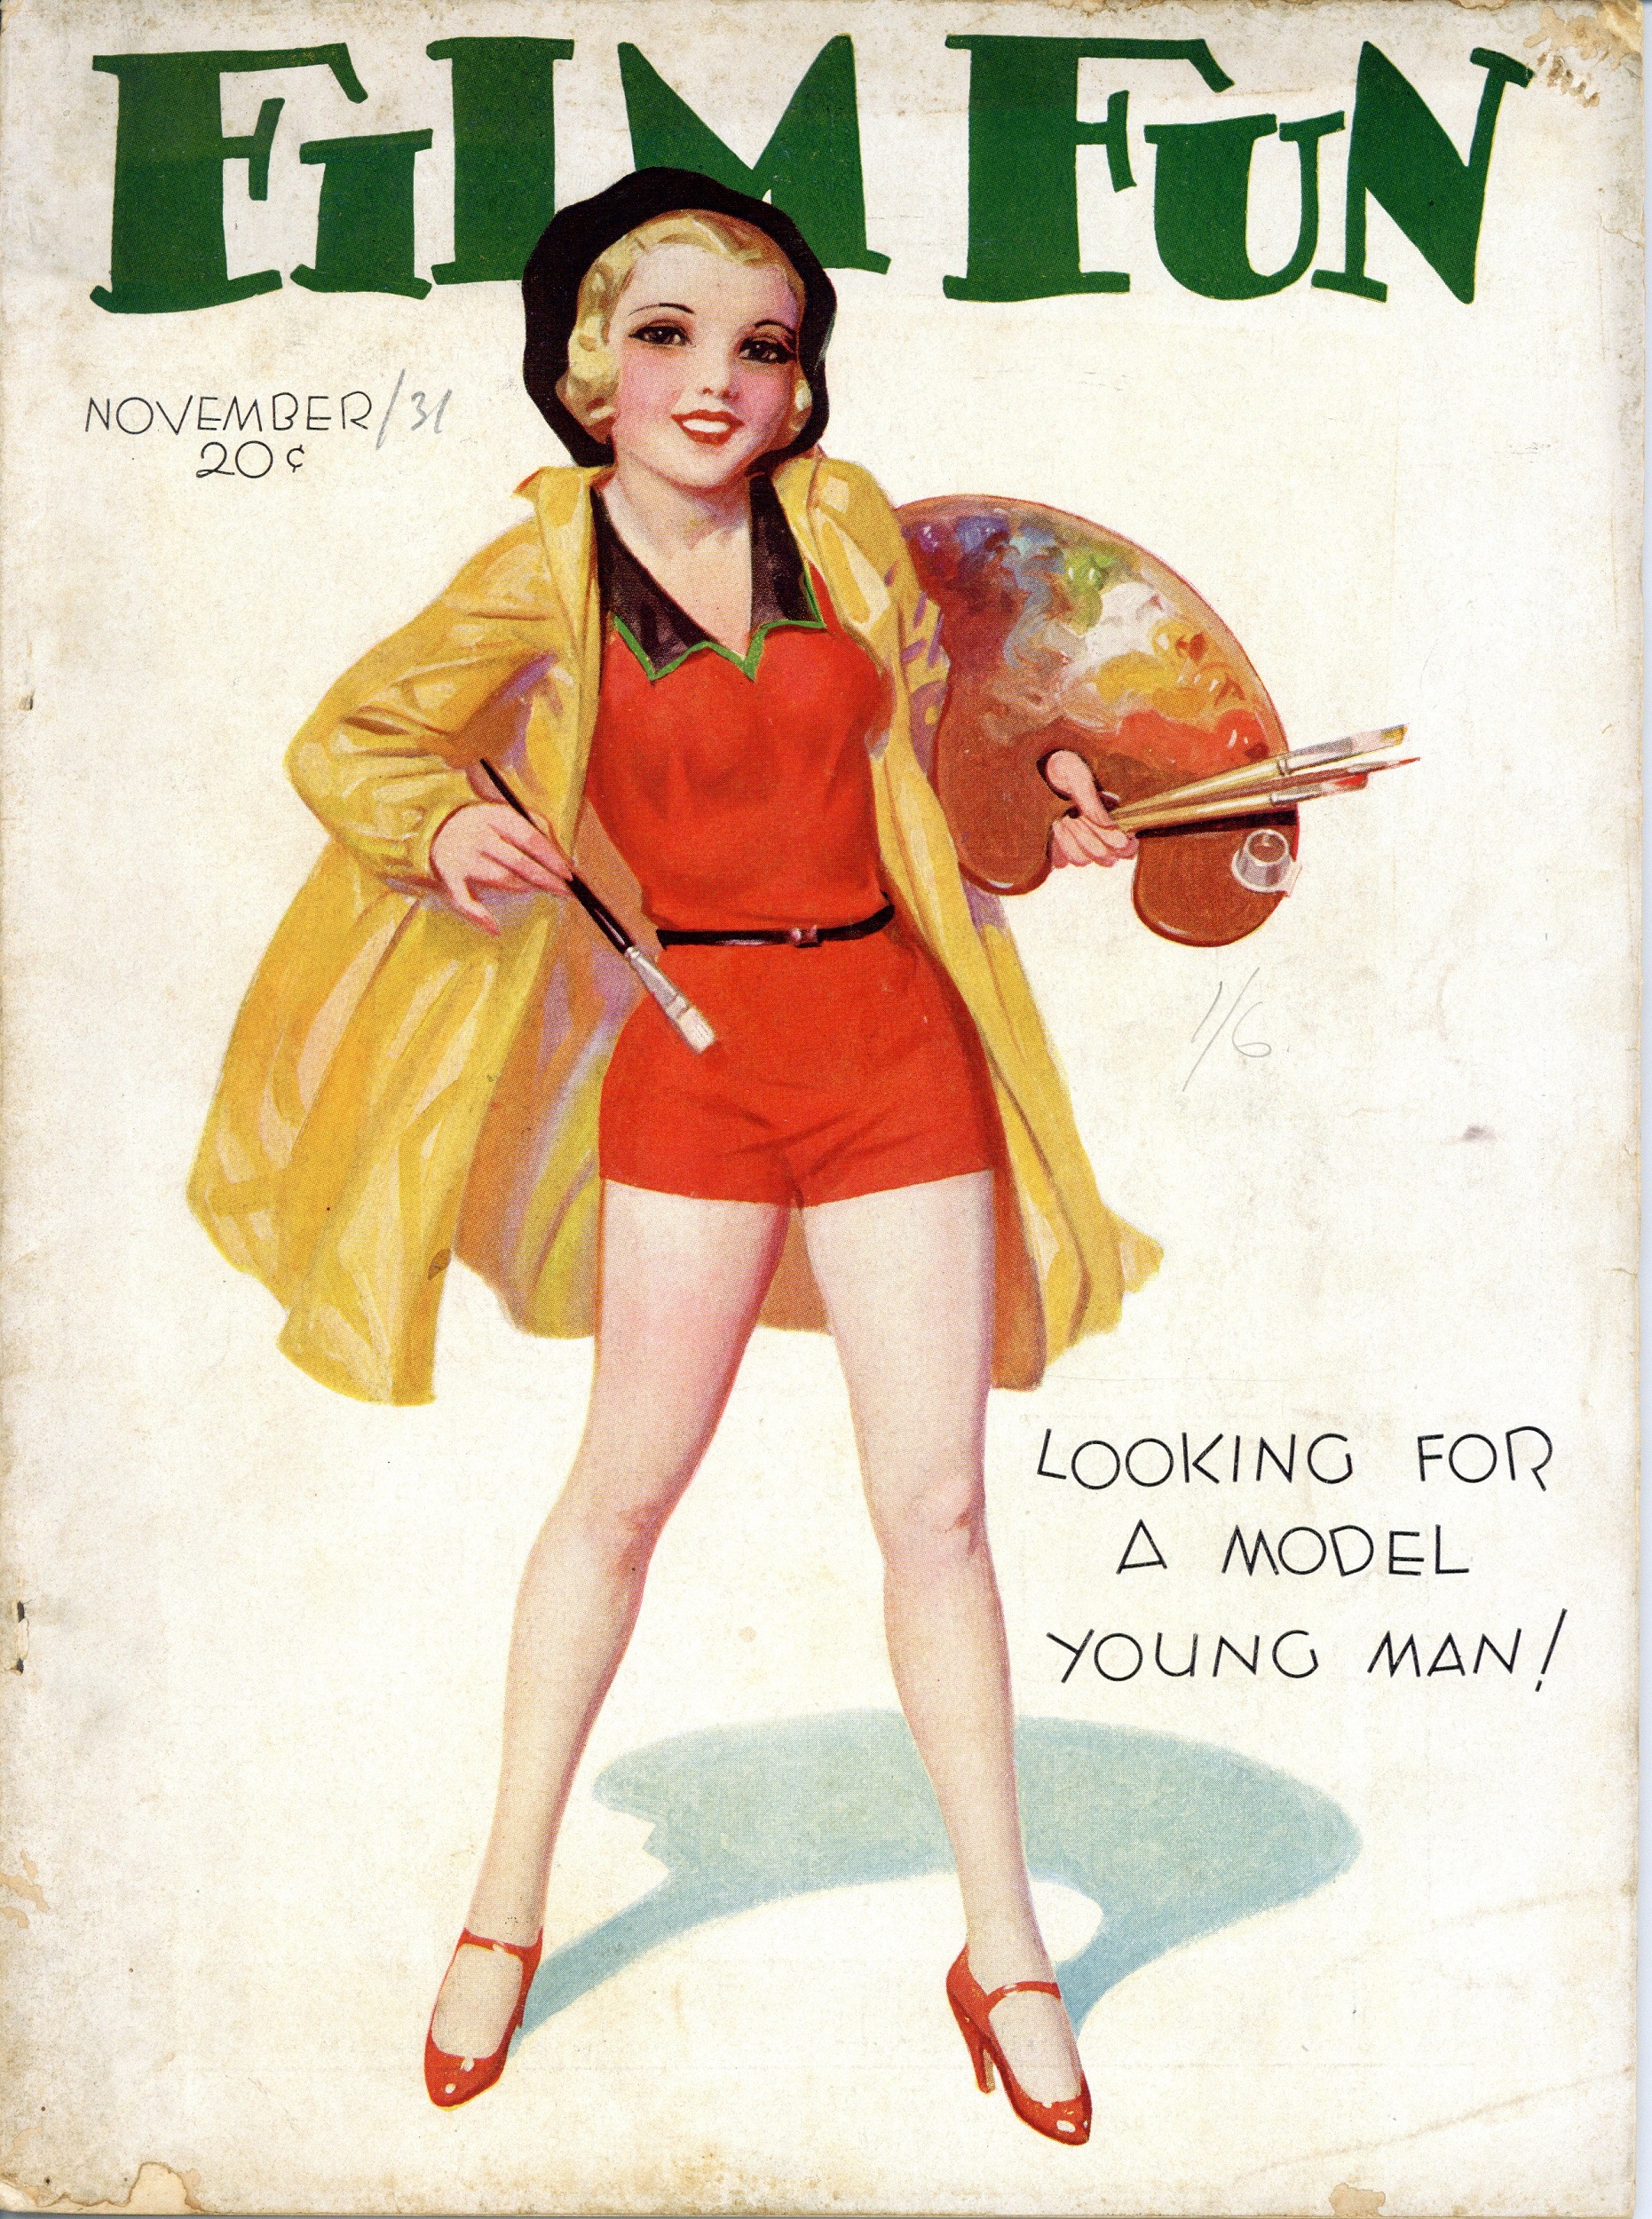 Cover of "Film Fun" Magazine, showing a blonde woman in a short red playsuit, smock, and beret, holding a palette and brushes. Text next to her reads "Looking for a Model Young Man!"